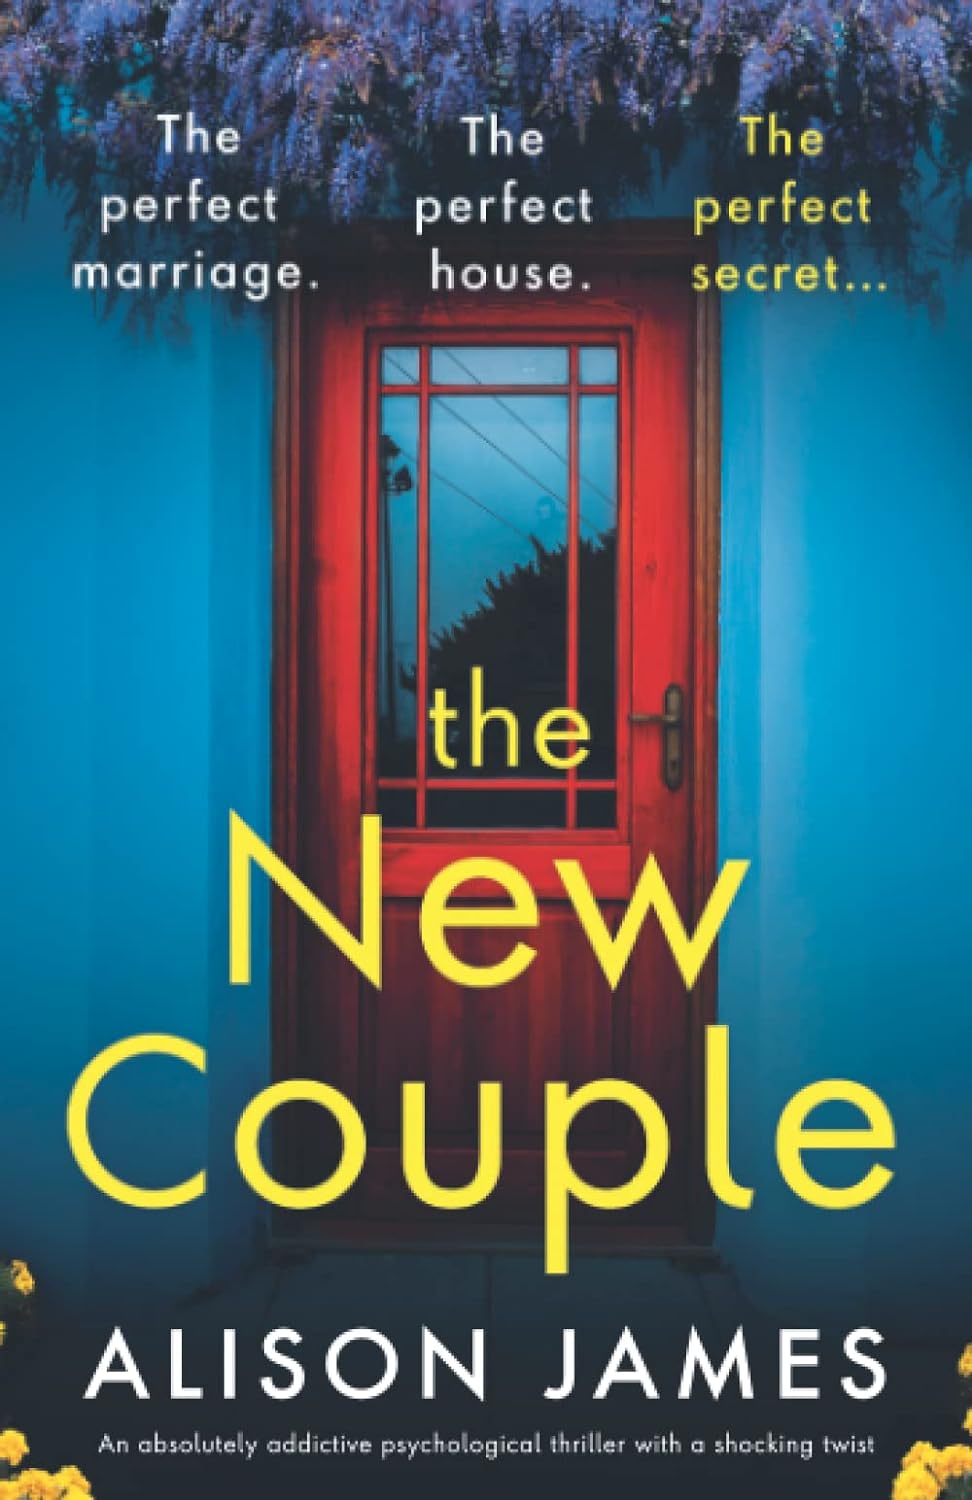 The New Couple: An absolutely addictive psychological thriller with a shocking twist     Paperback – September 22, 2022